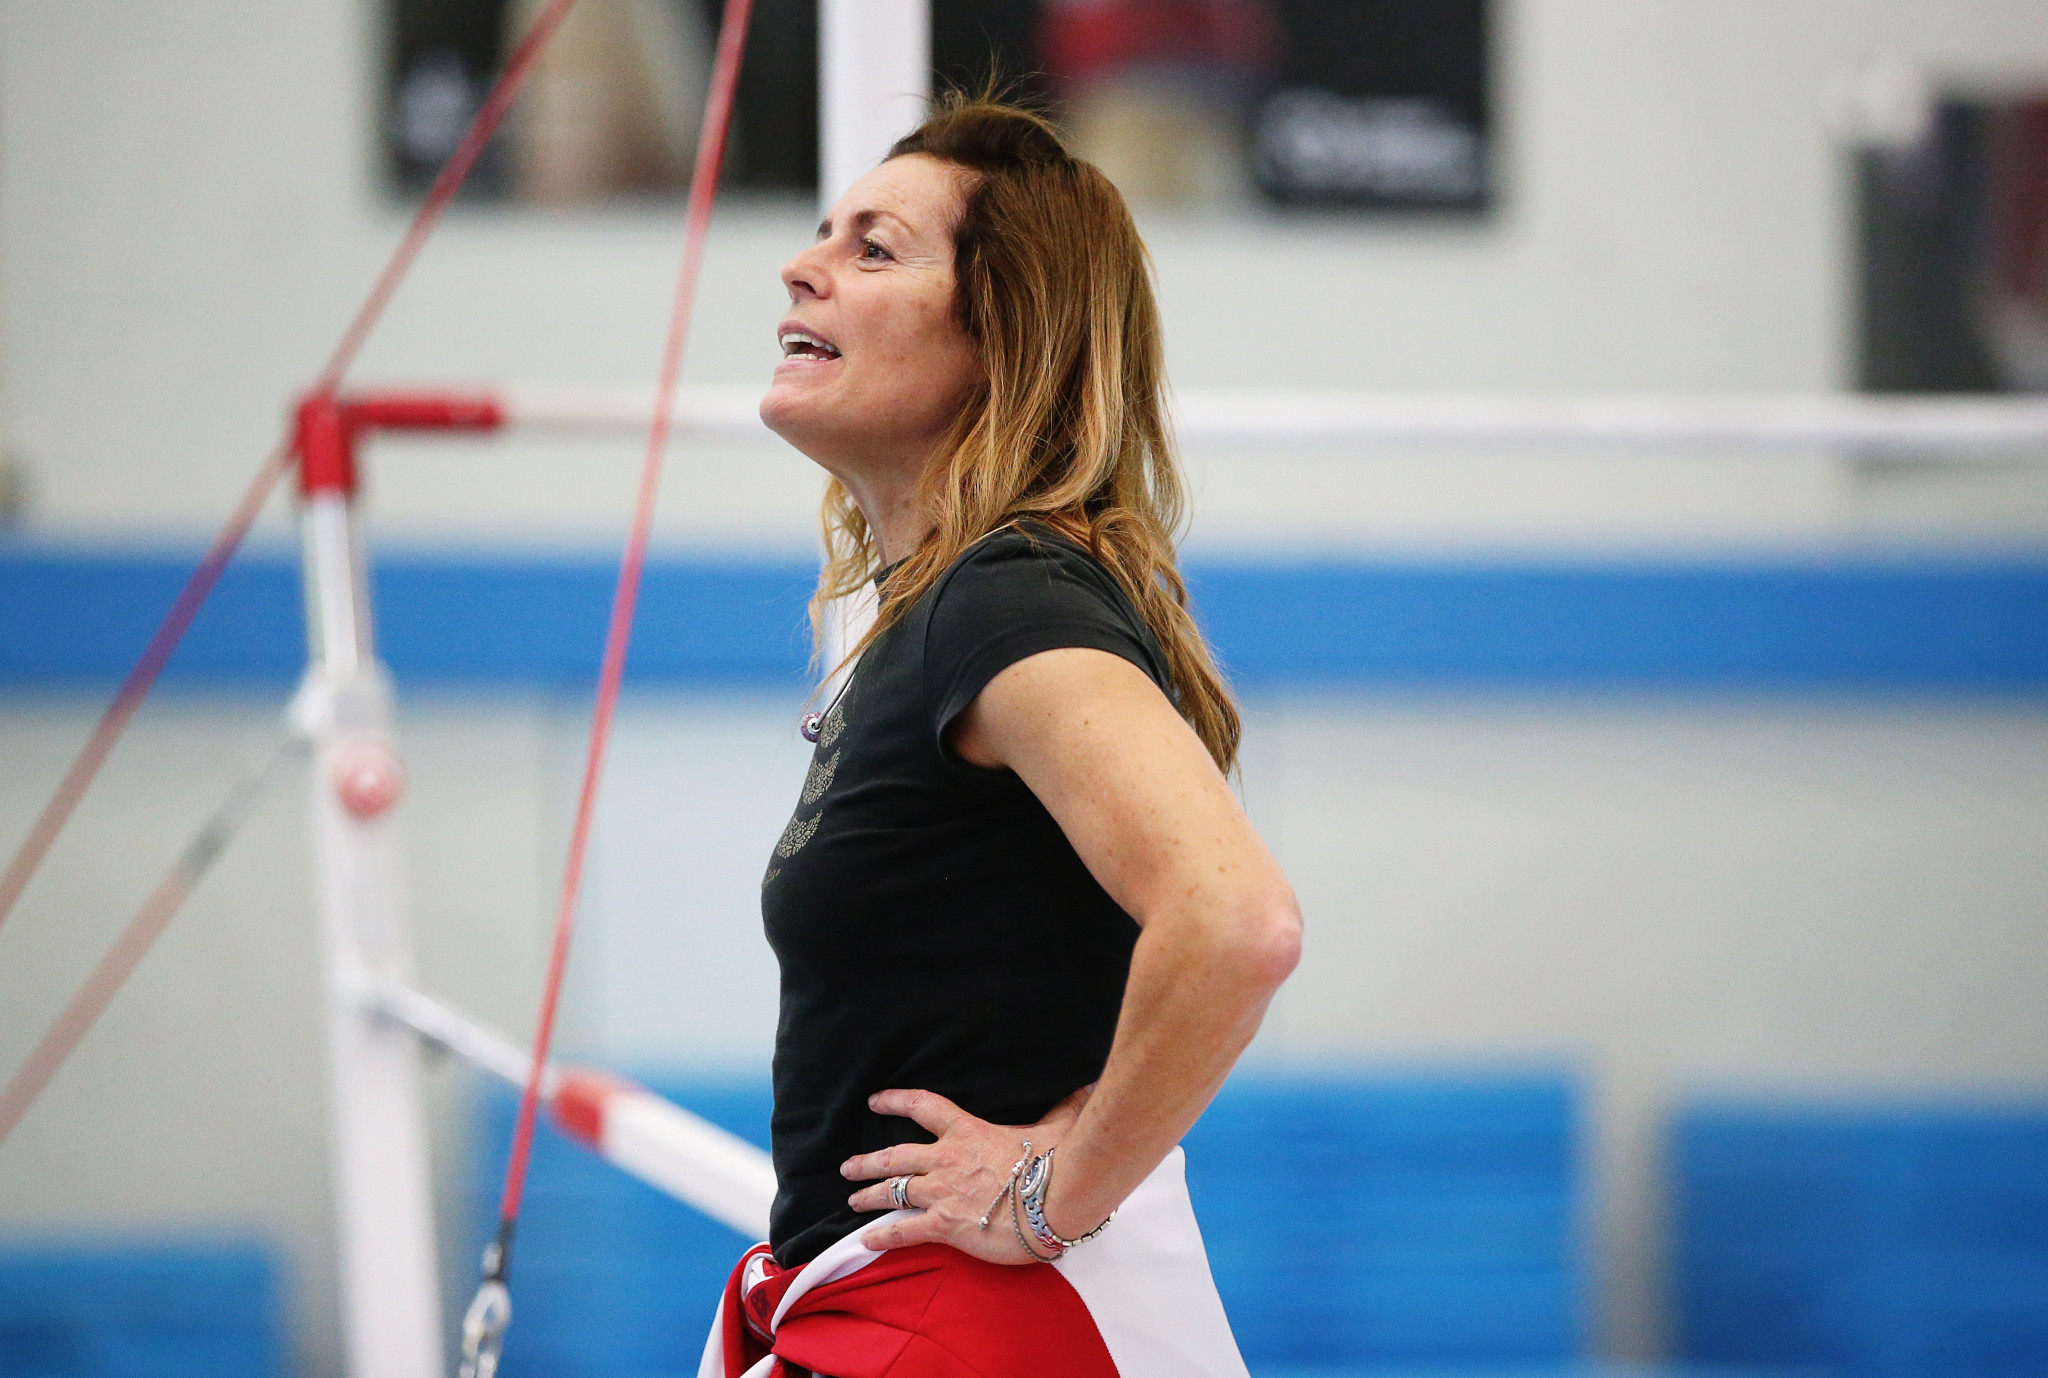 British Gymnastics head coach temporarily stands aside amid abuse allegations